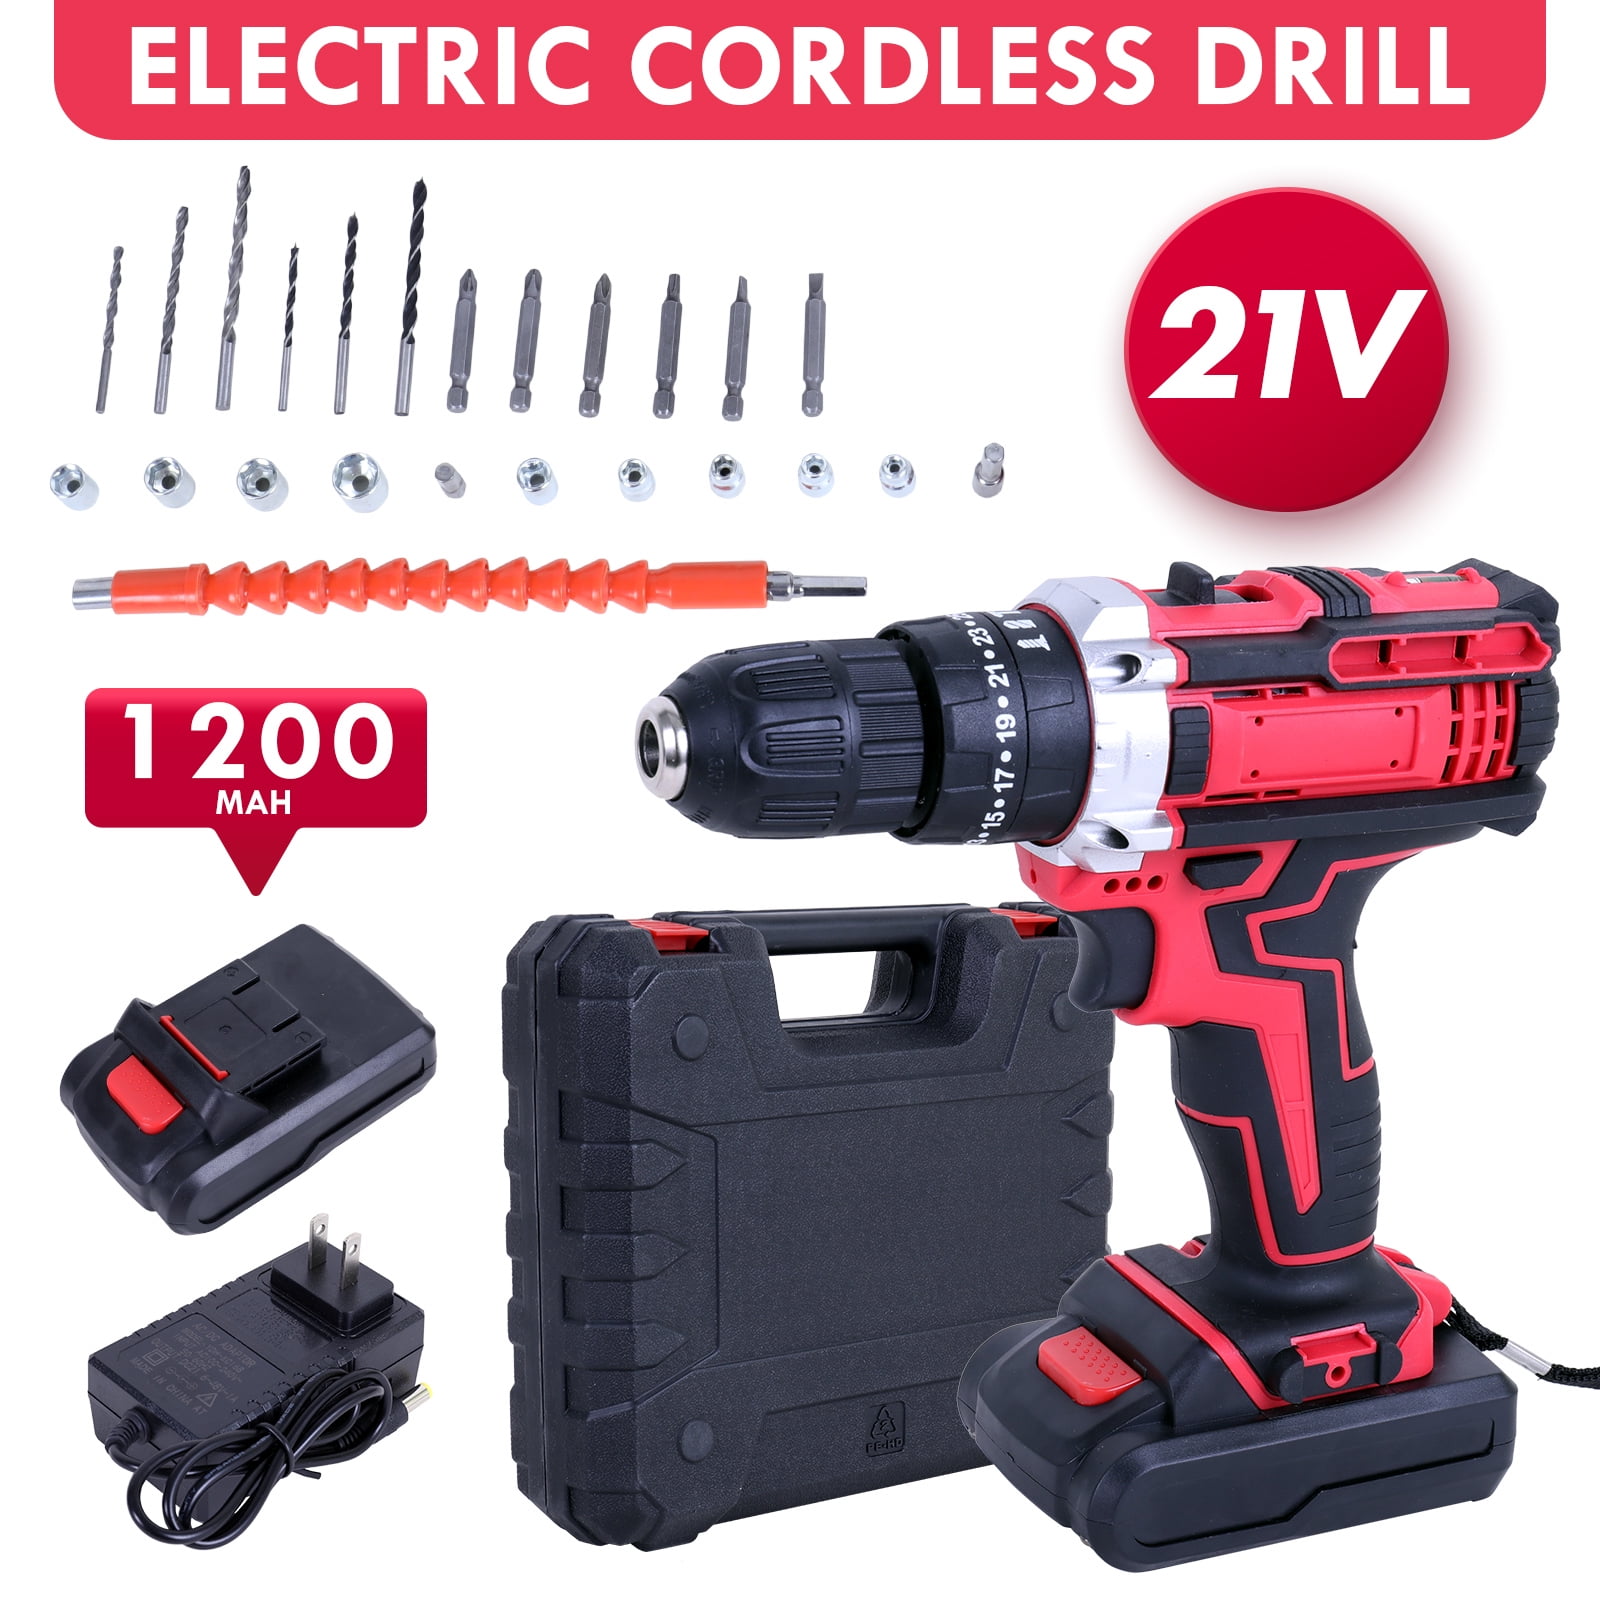 20V Cordless Power Drill Set, Drill Kit with 1 Lithium-Ion & Charger, 3/8  Keyless Chuck, Electric Drill W/ 2 Variable Speed & LED Light, 25+1  Position and 34pcs Drill/Driver Bits(Blue) 